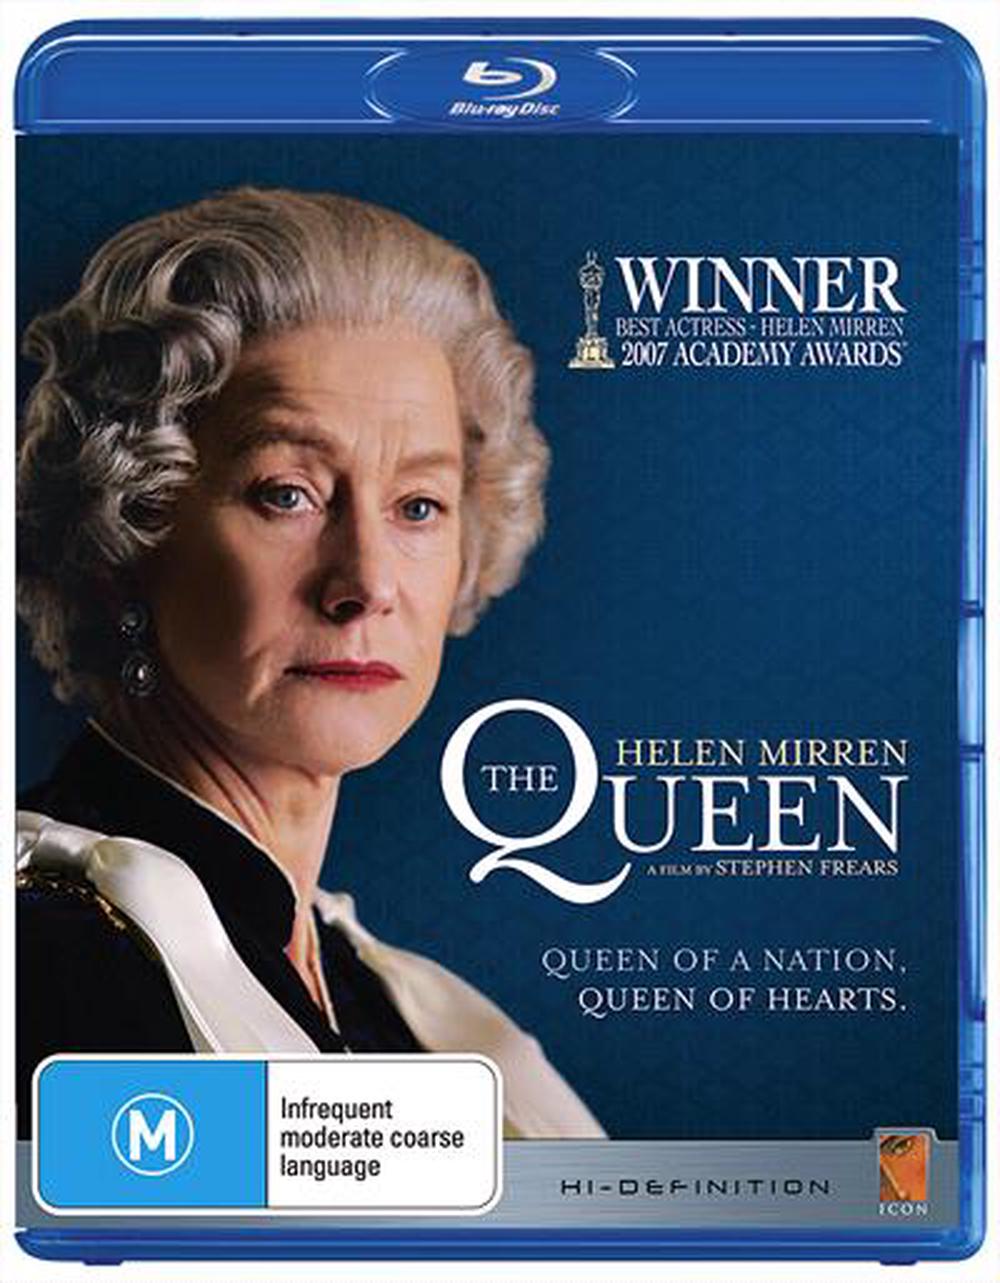 The Queen, Blu-Ray | Buy online at The Nile